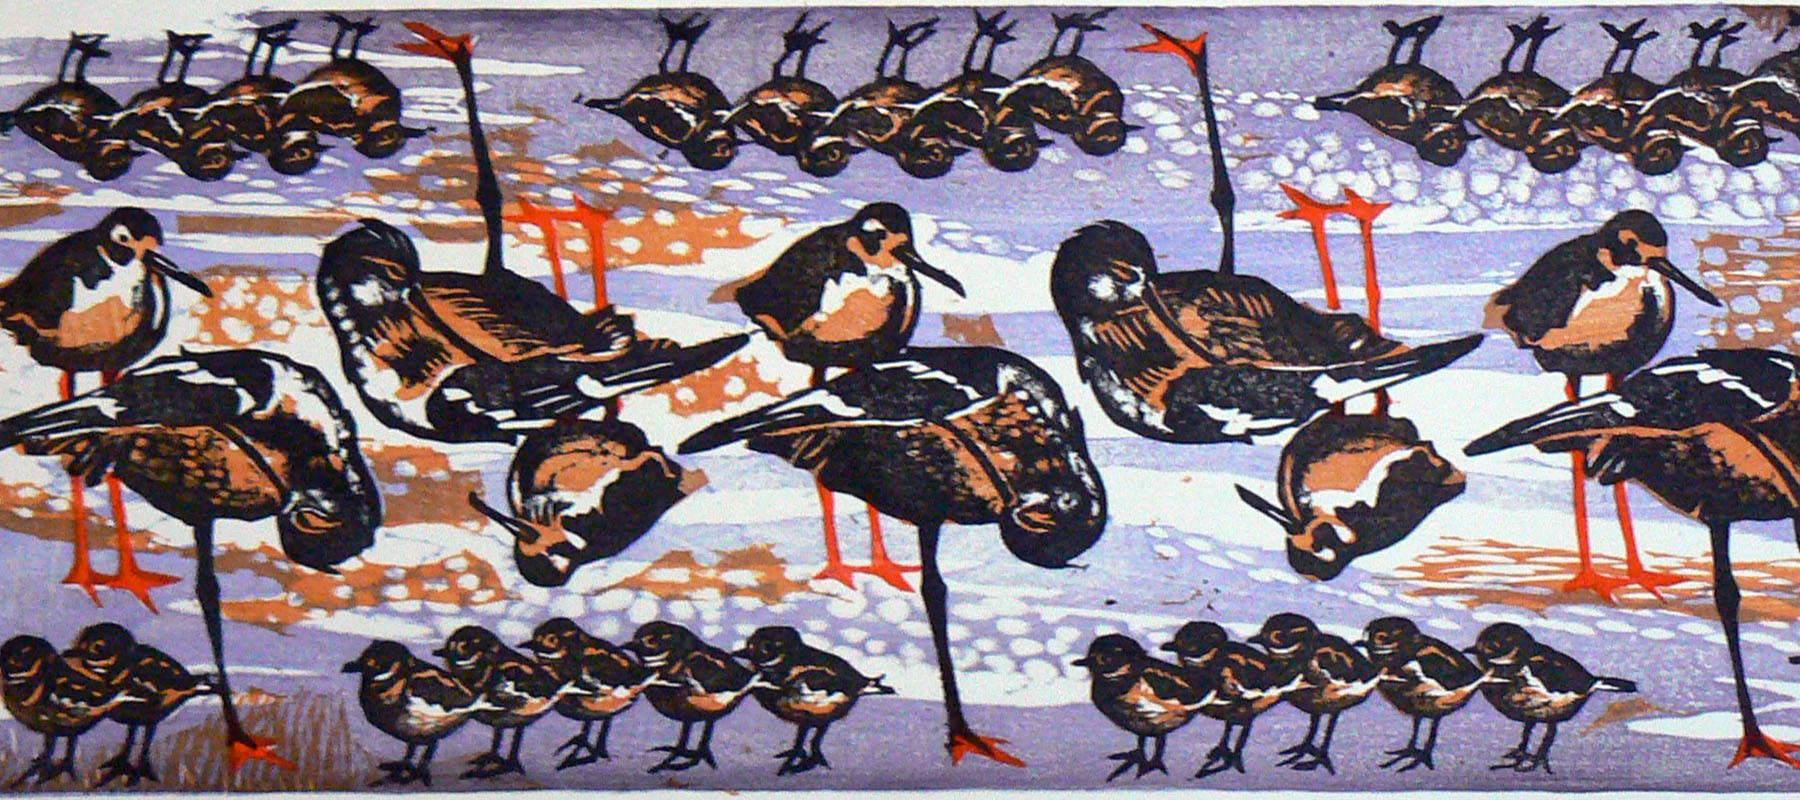 This Japanese print contains a pattern featuring groups of birds.